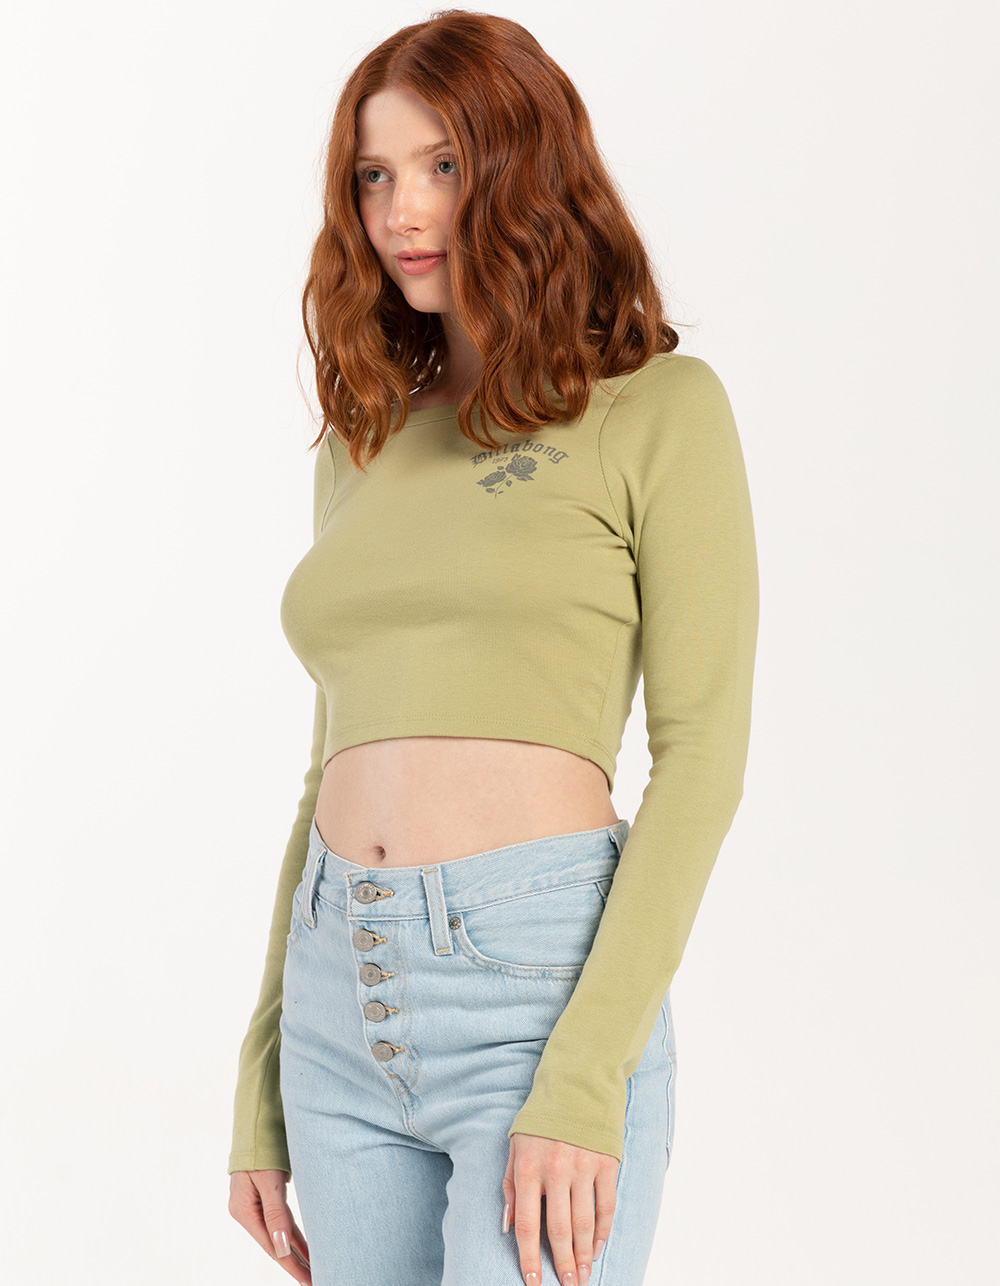 BILLABONG Tropic Breeze Fitted Crop Womens Long Sleeve Tee - ARMY